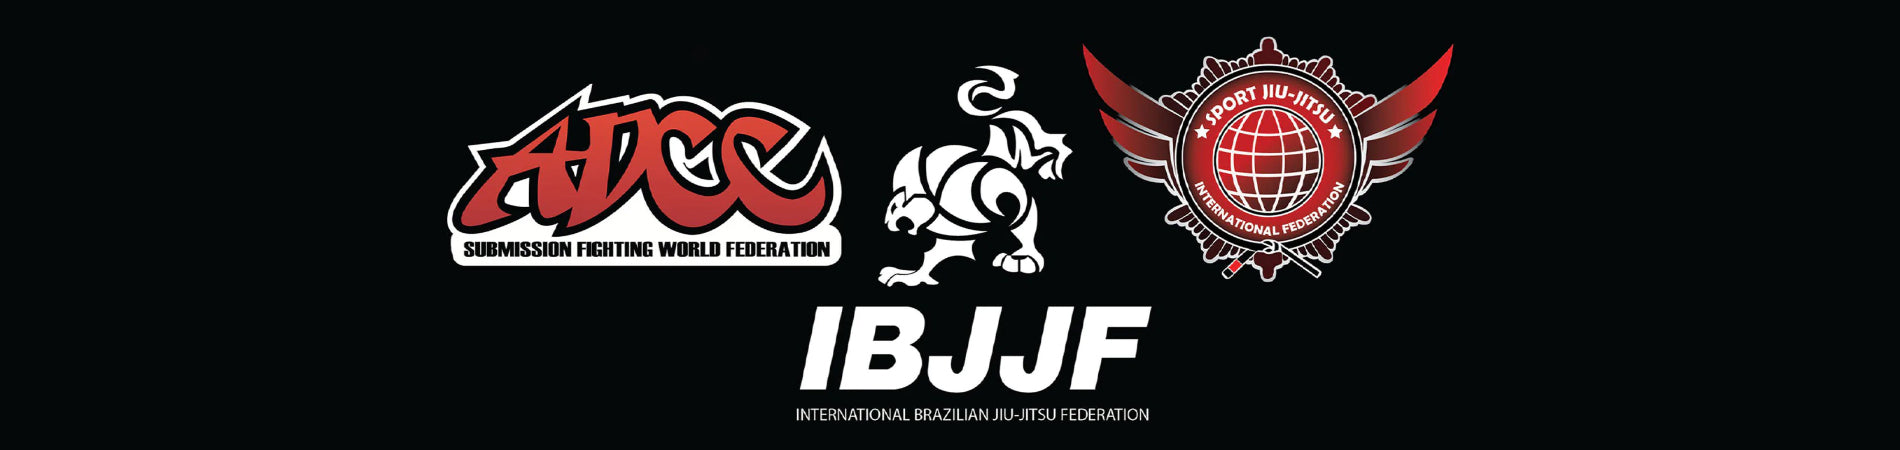 Scoring Guide to BJJ Competitions: IBJJF, SJJIF, and ADCC